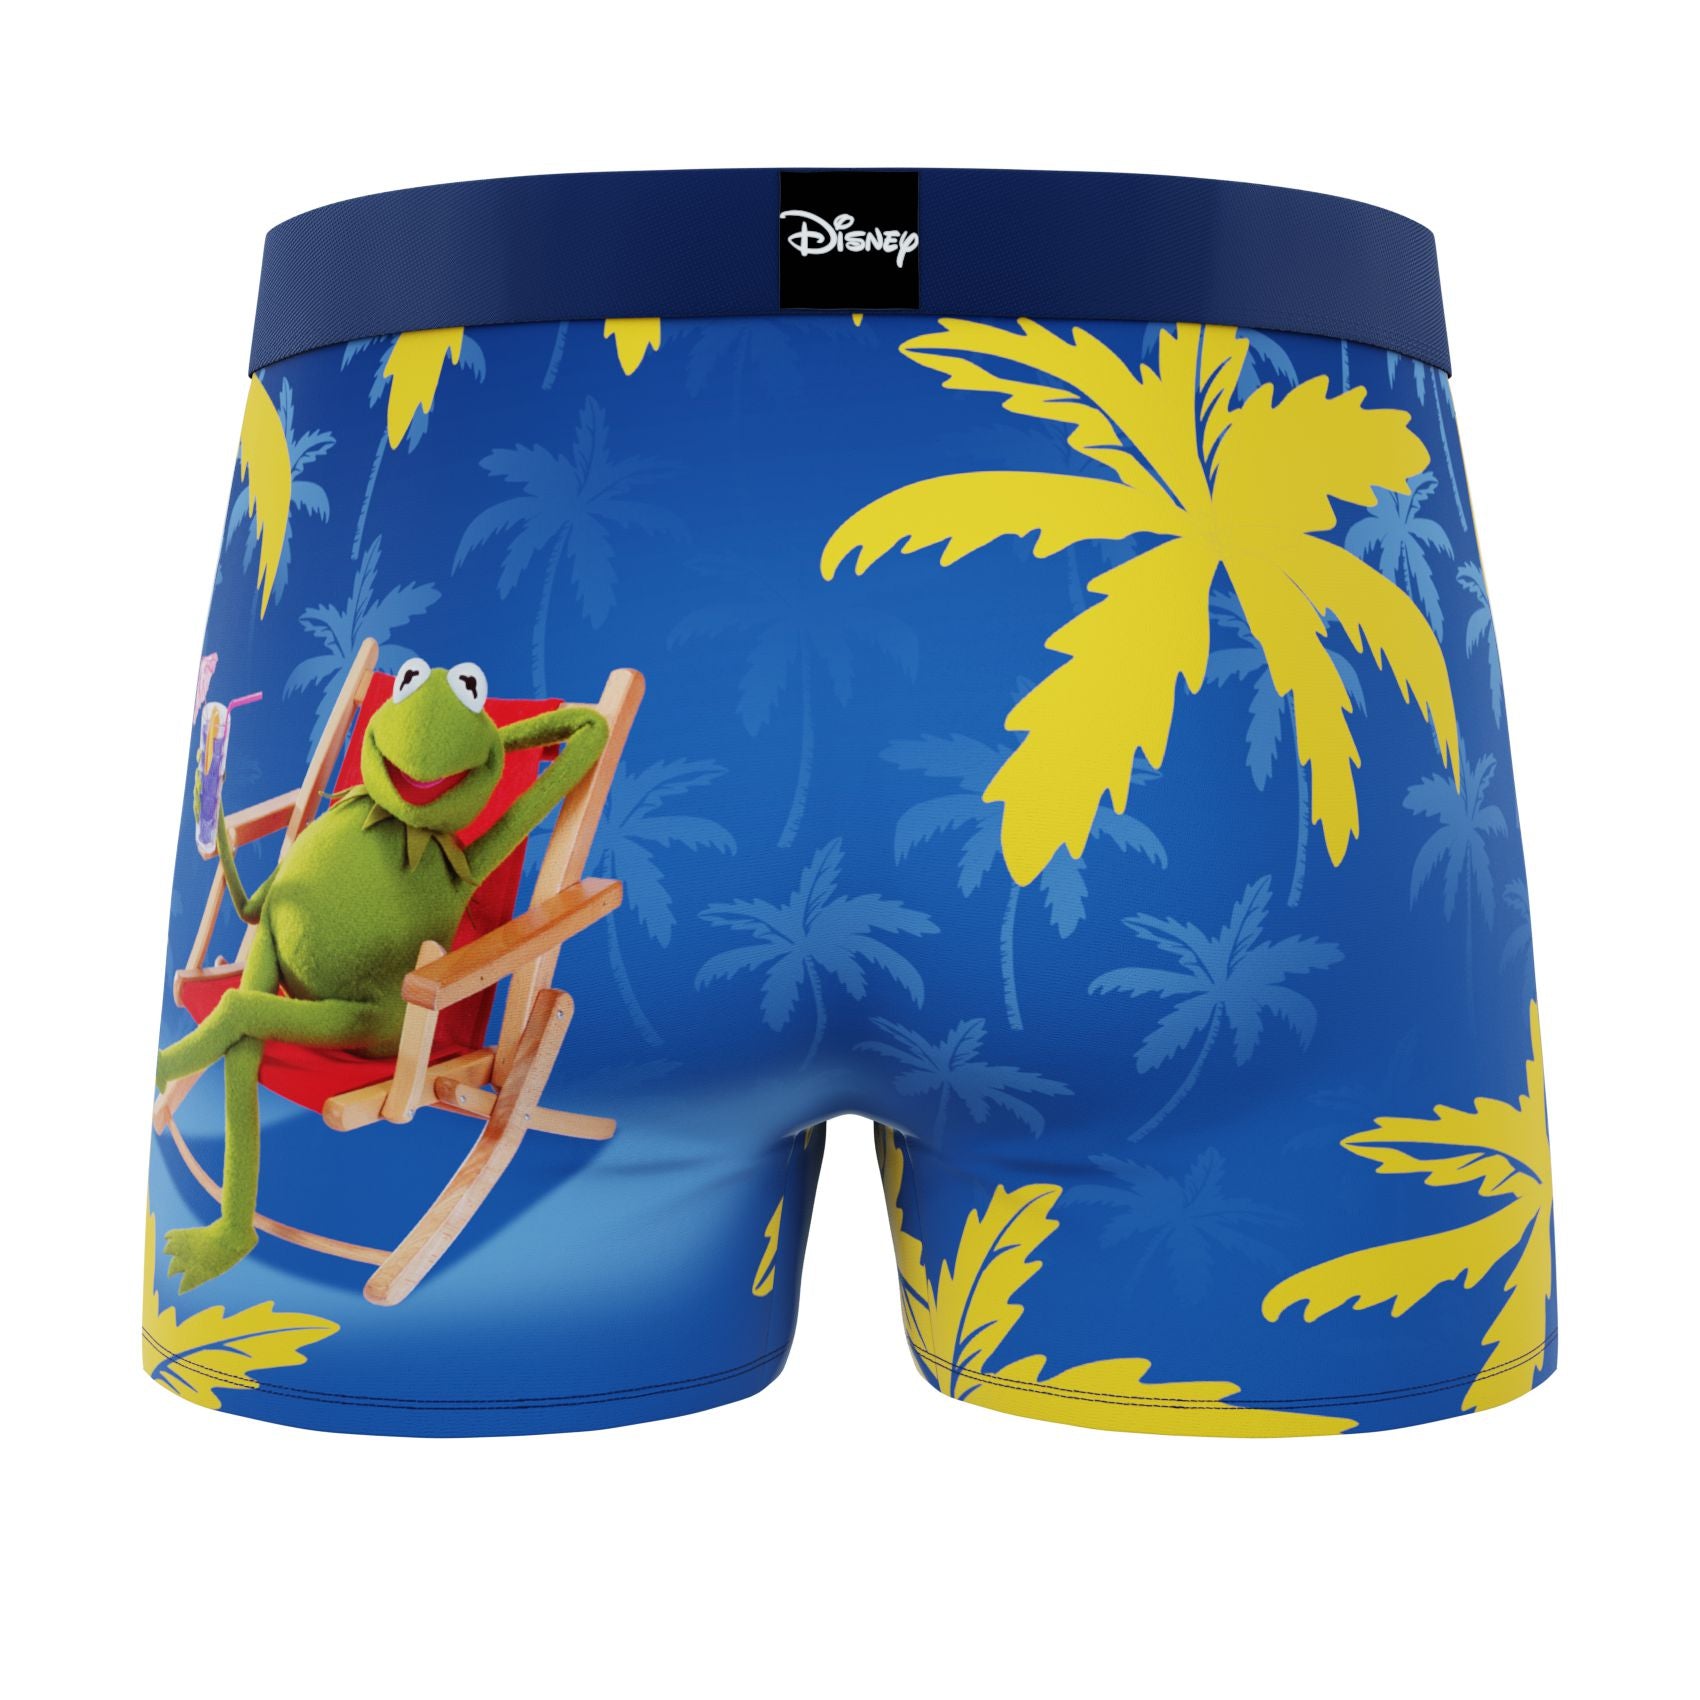 CRAZYBOXER Toy Story Woody Men's Boxer Briefs